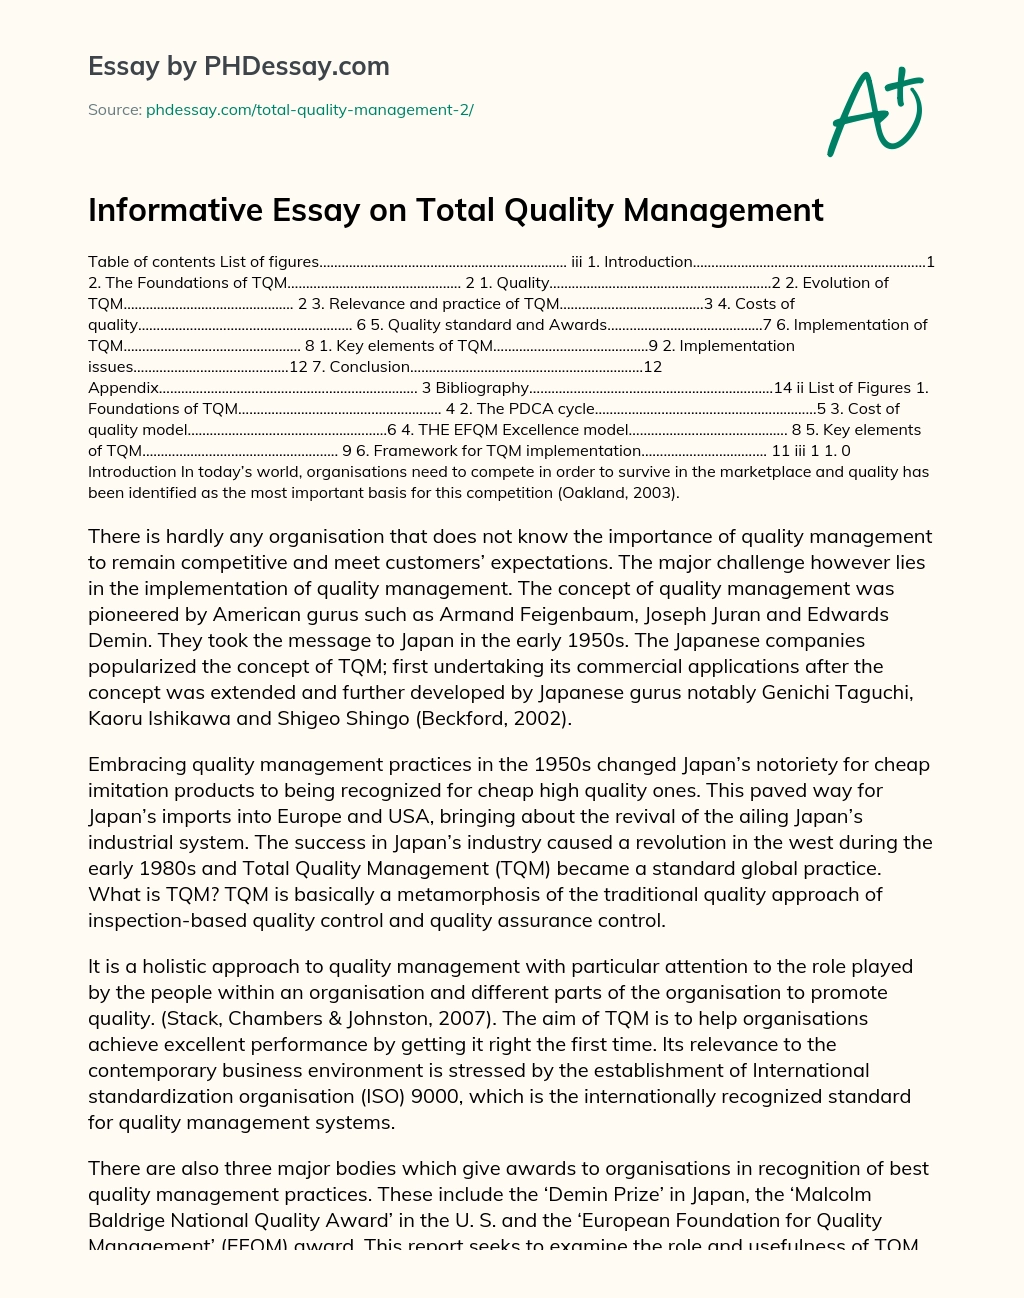 Informative Essay on Total Quality Management essay